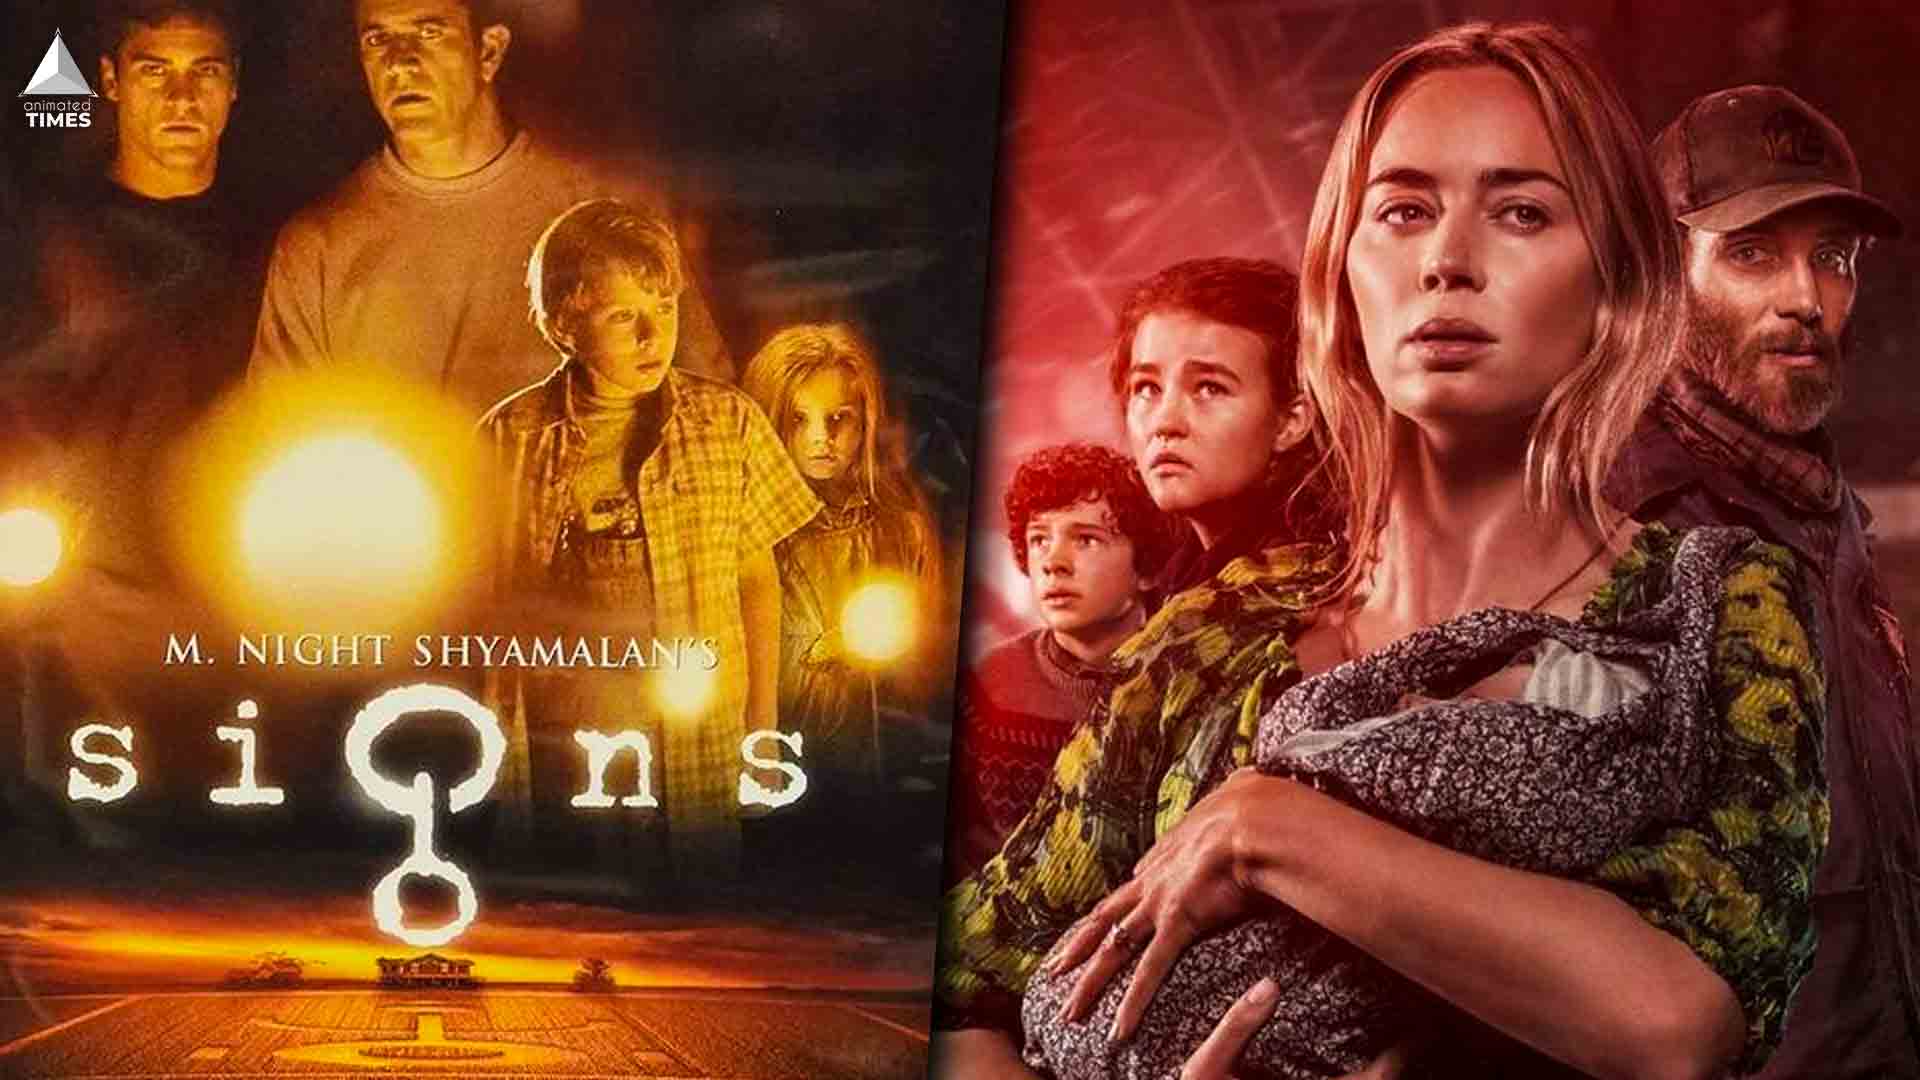 A Quiet Place II Copies Its Major Twist From Shyamalans Boring Movie